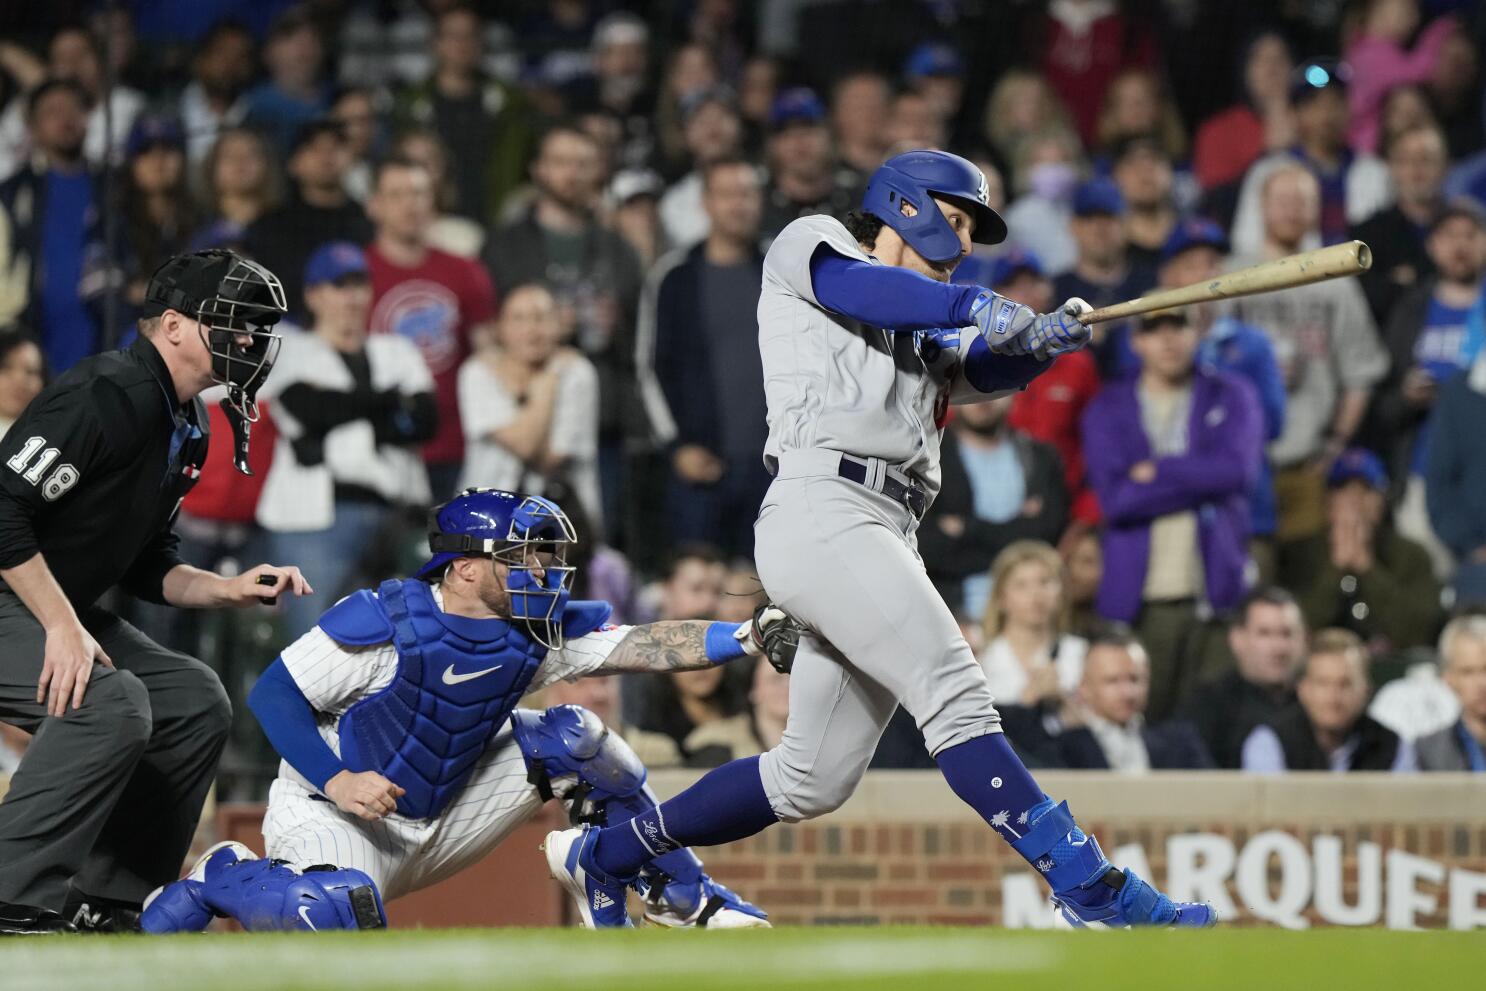 Cubs Home Run Swings: MLB The Show 20 Vs. Real Life